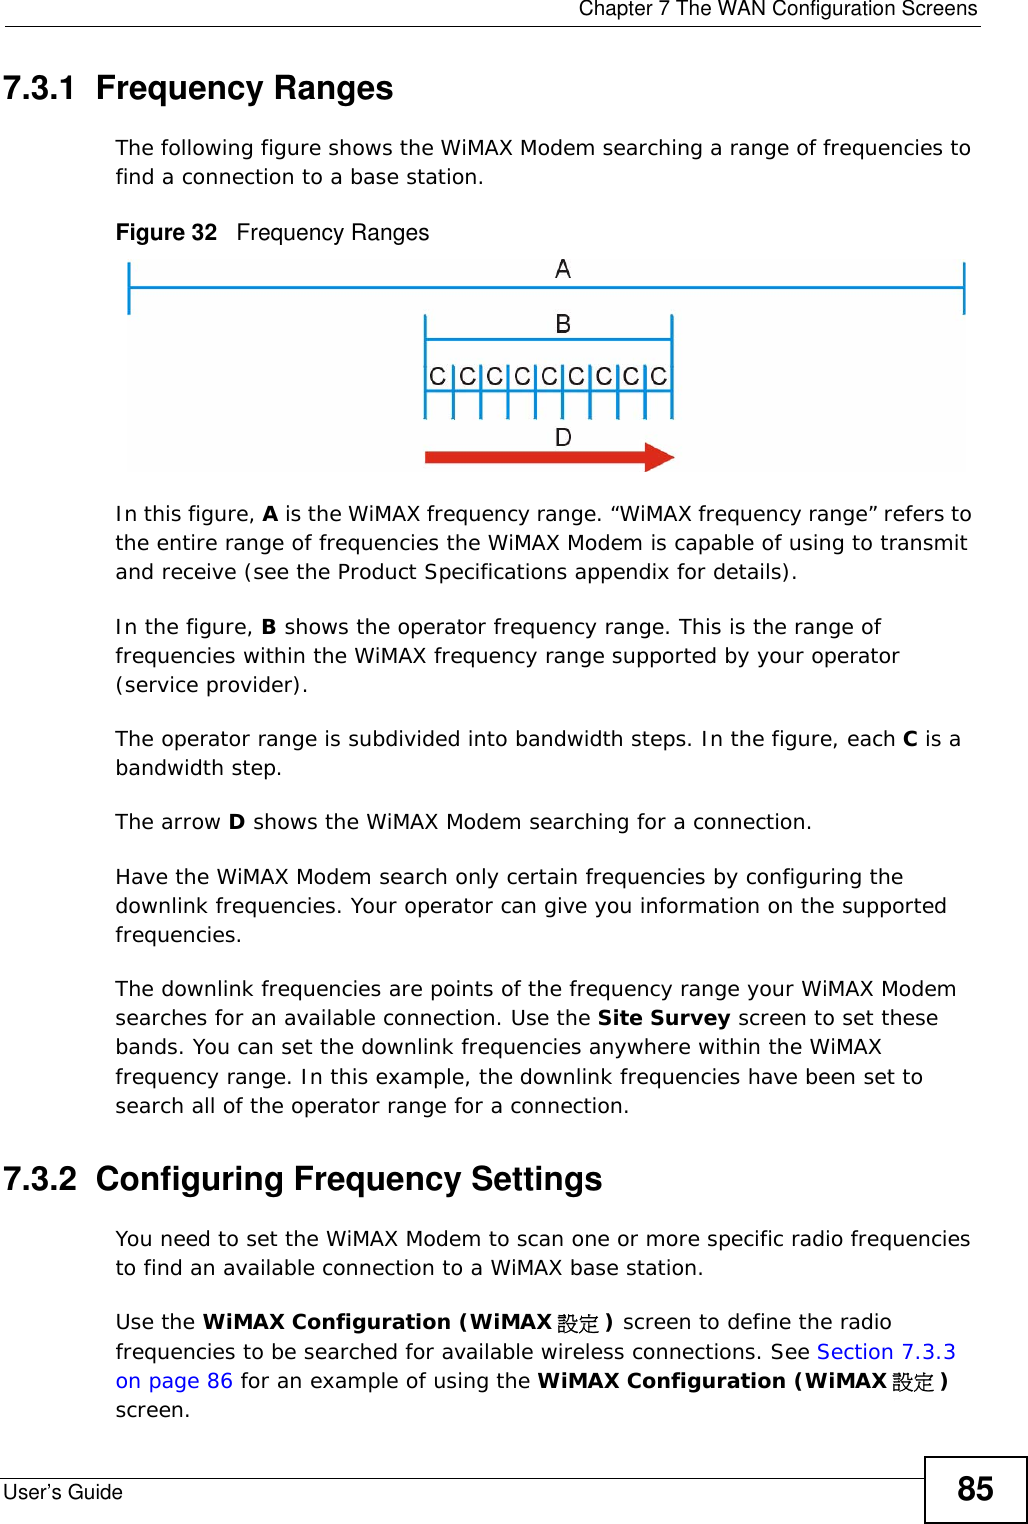  Chapter 7 The WAN Configuration ScreensUser’s Guide 857.3.1  Frequency RangesThe following figure shows the WiMAX Modem searching a range of frequencies to find a connection to a base station. Figure 32   Frequency RangesIn this figure, A is the WiMAX frequency range. “WiMAX frequency range” refers to the entire range of frequencies the WiMAX Modem is capable of using to transmit and receive (see the Product Specifications appendix for details). In the figure, B shows the operator frequency range. This is the range of frequencies within the WiMAX frequency range supported by your operator (service provider).The operator range is subdivided into bandwidth steps. In the figure, each C is a bandwidth step.The arrow D shows the WiMAX Modem searching for a connection.Have the WiMAX Modem search only certain frequencies by configuring the downlink frequencies. Your operator can give you information on the supported frequencies. The downlink frequencies are points of the frequency range your WiMAX Modem searches for an available connection. Use the Site Survey screen to set these bands. You can set the downlink frequencies anywhere within the WiMAX frequency range. In this example, the downlink frequencies have been set to search all of the operator range for a connection.7.3.2  Configuring Frequency SettingsYou need to set the WiMAX Modem to scan one or more specific radio frequencies to find an available connection to a WiMAX base station. Use the WiMAX Configuration (WiMAX 設定 ) screen to define the radio frequencies to be searched for available wireless connections. See Section 7.3.3 on page 86 for an example of using the WiMAX Configuration (WiMAX 設定 ) screen.